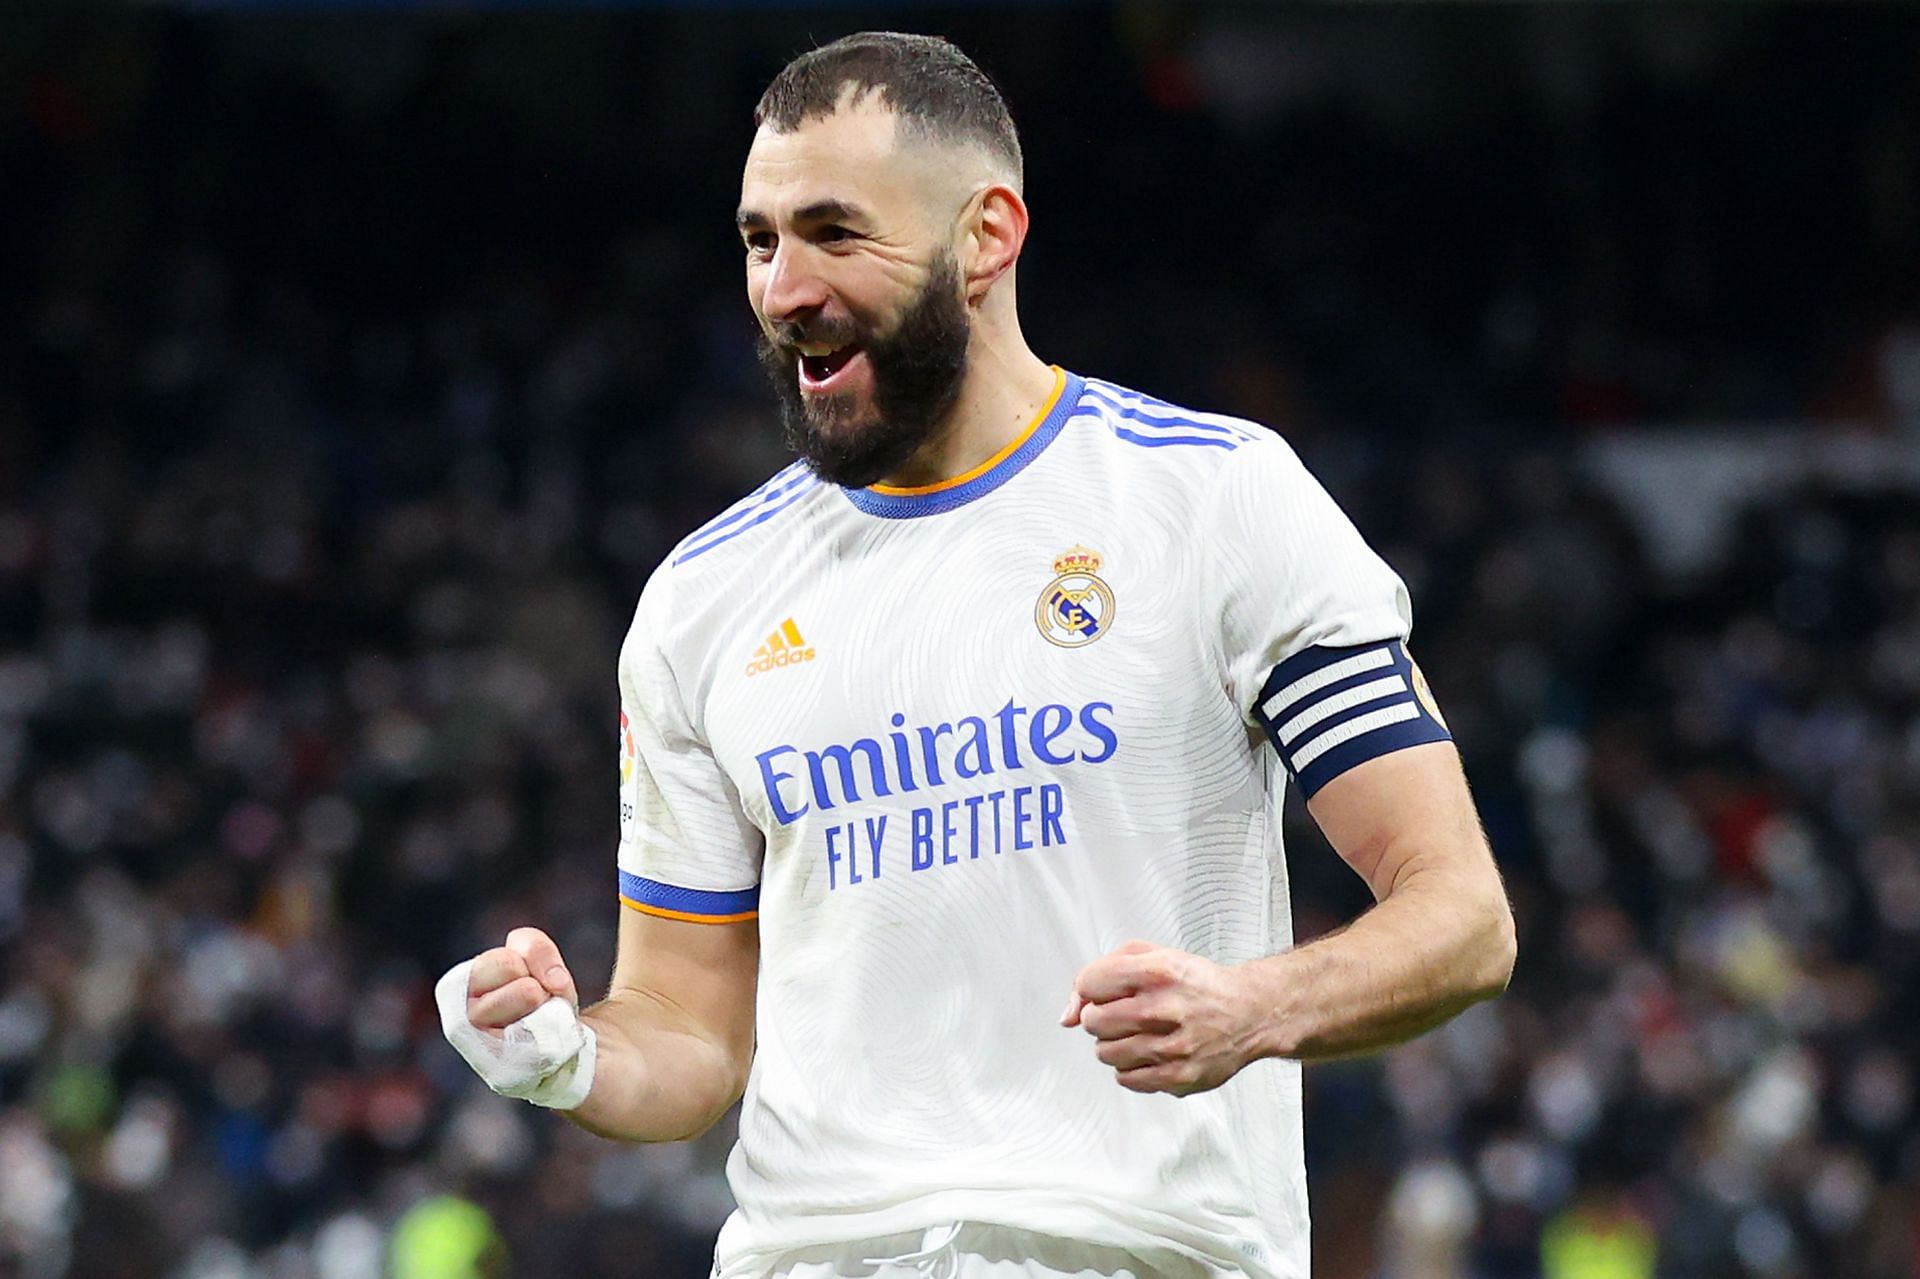 Karim Benzema has been a very consistent performer